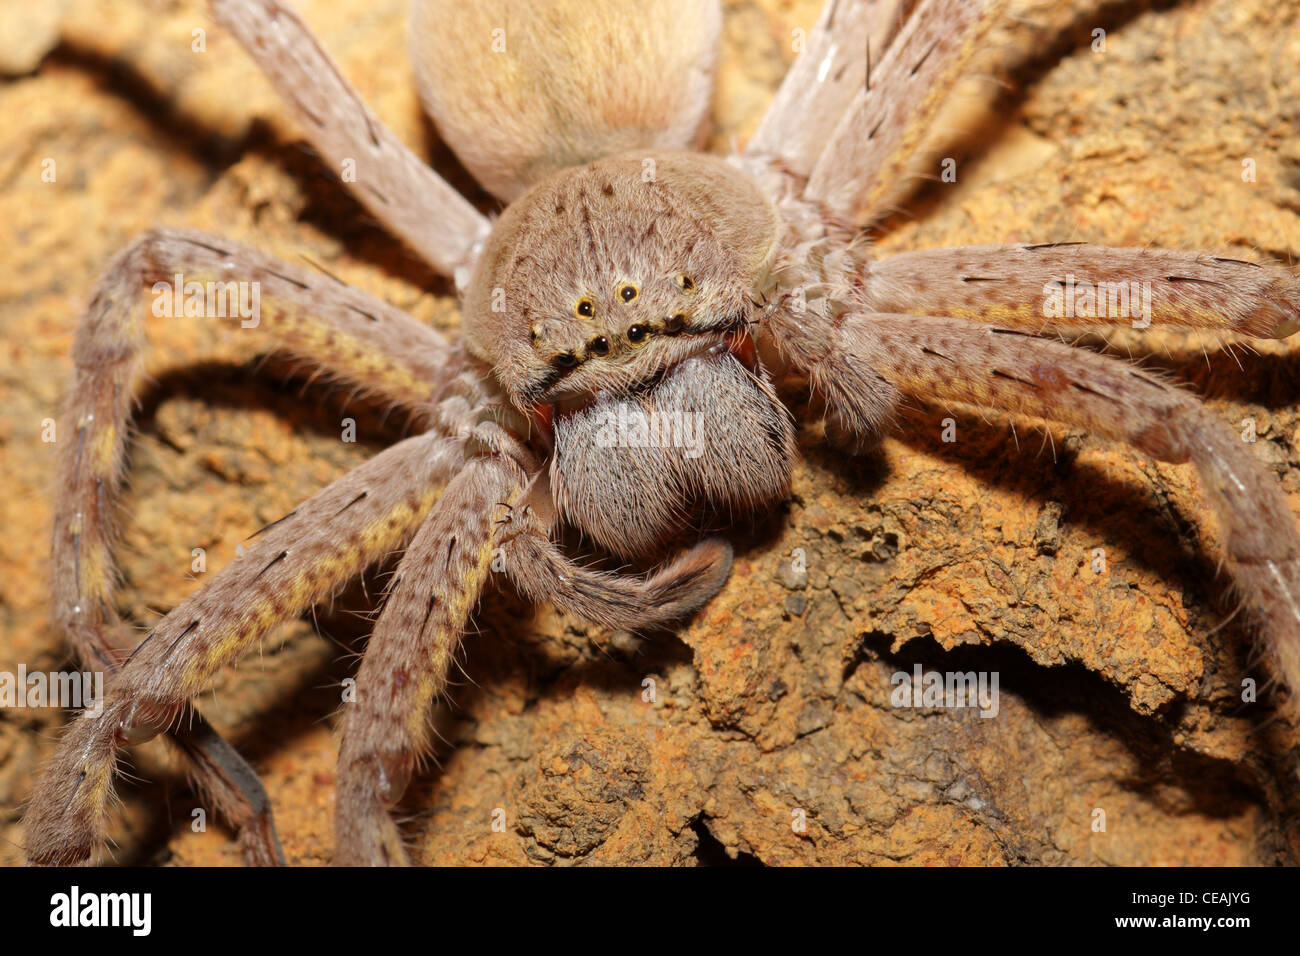 Close-up of a hairy spider with large fangs Stock Photo